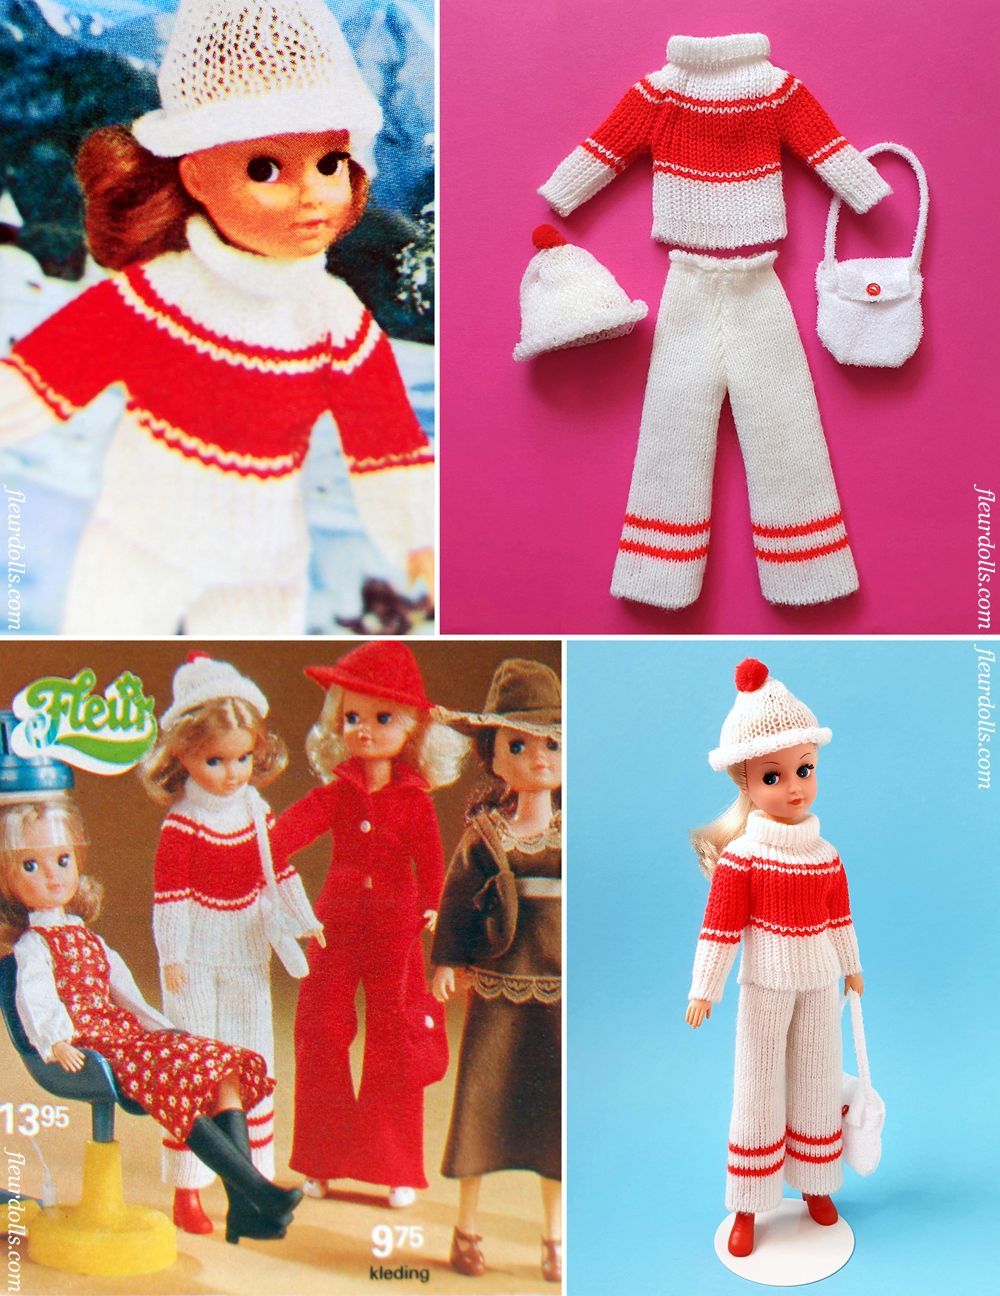 Fleur doll knitted set 1208 white red sweater hat Otto Simon Dutch Sindy